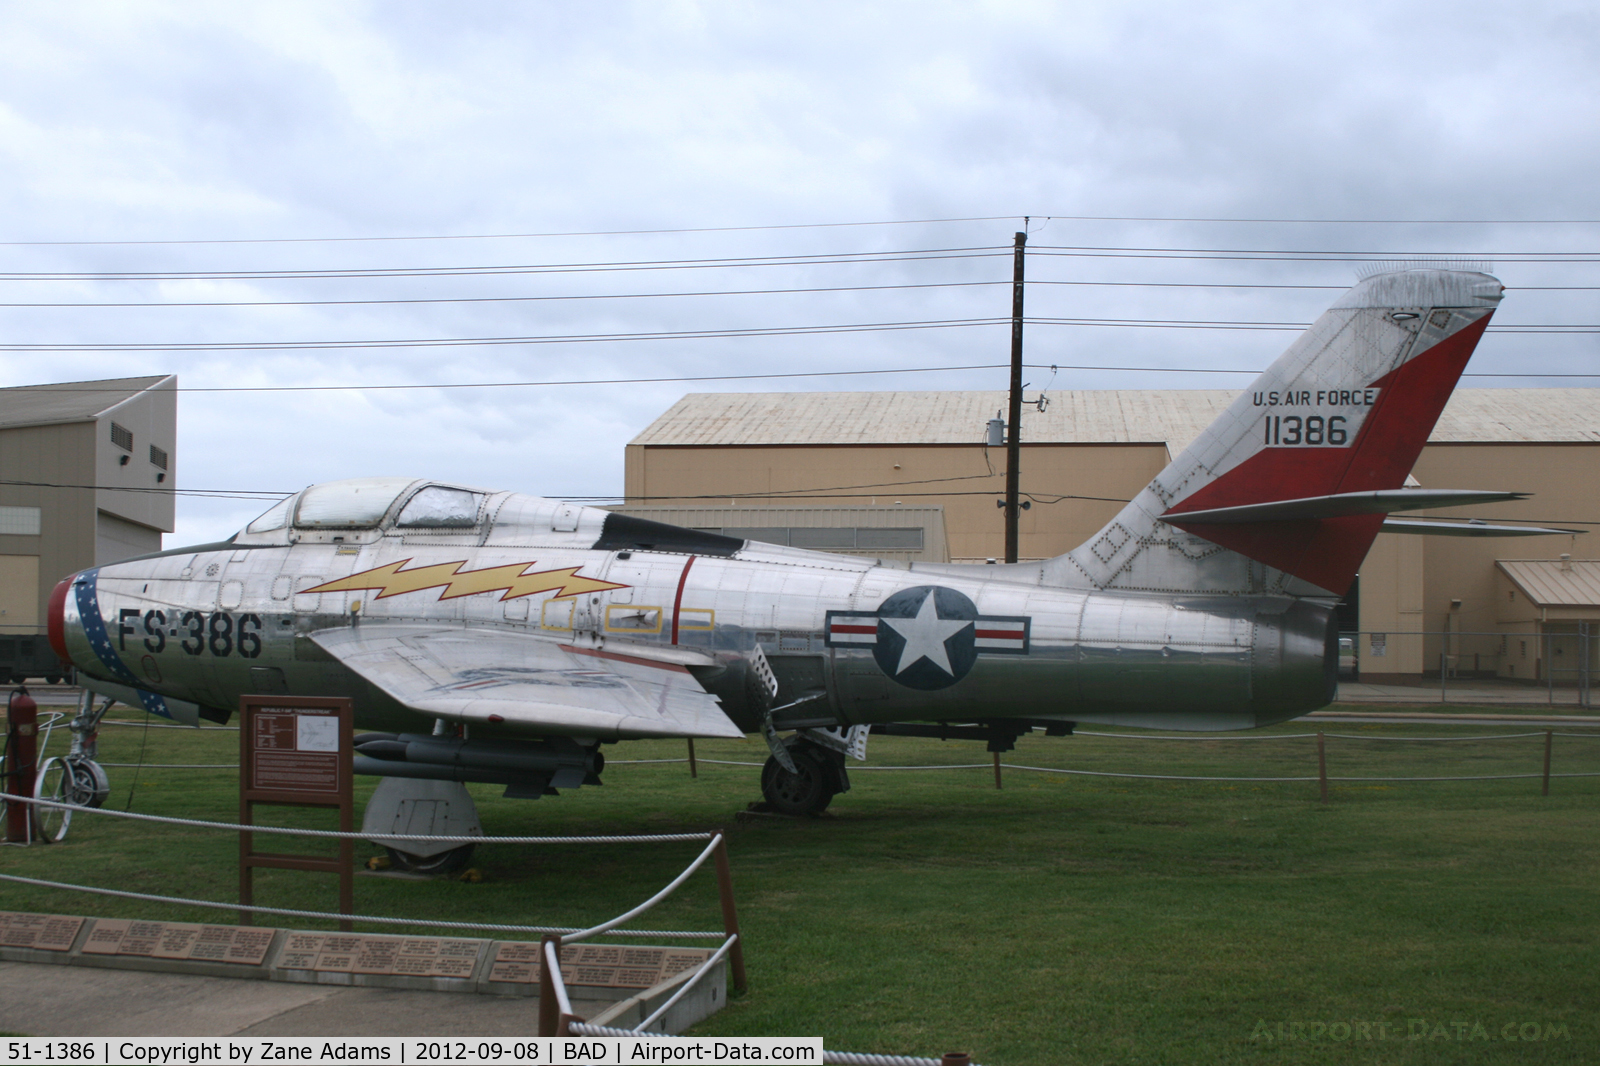 51-1386, 1951 Republic F-84F-15-RE Thunderstreak C/N Not found 51-1386, On display at the 8th Air Force Museum - Barksdale AFB, Shreveport, LA